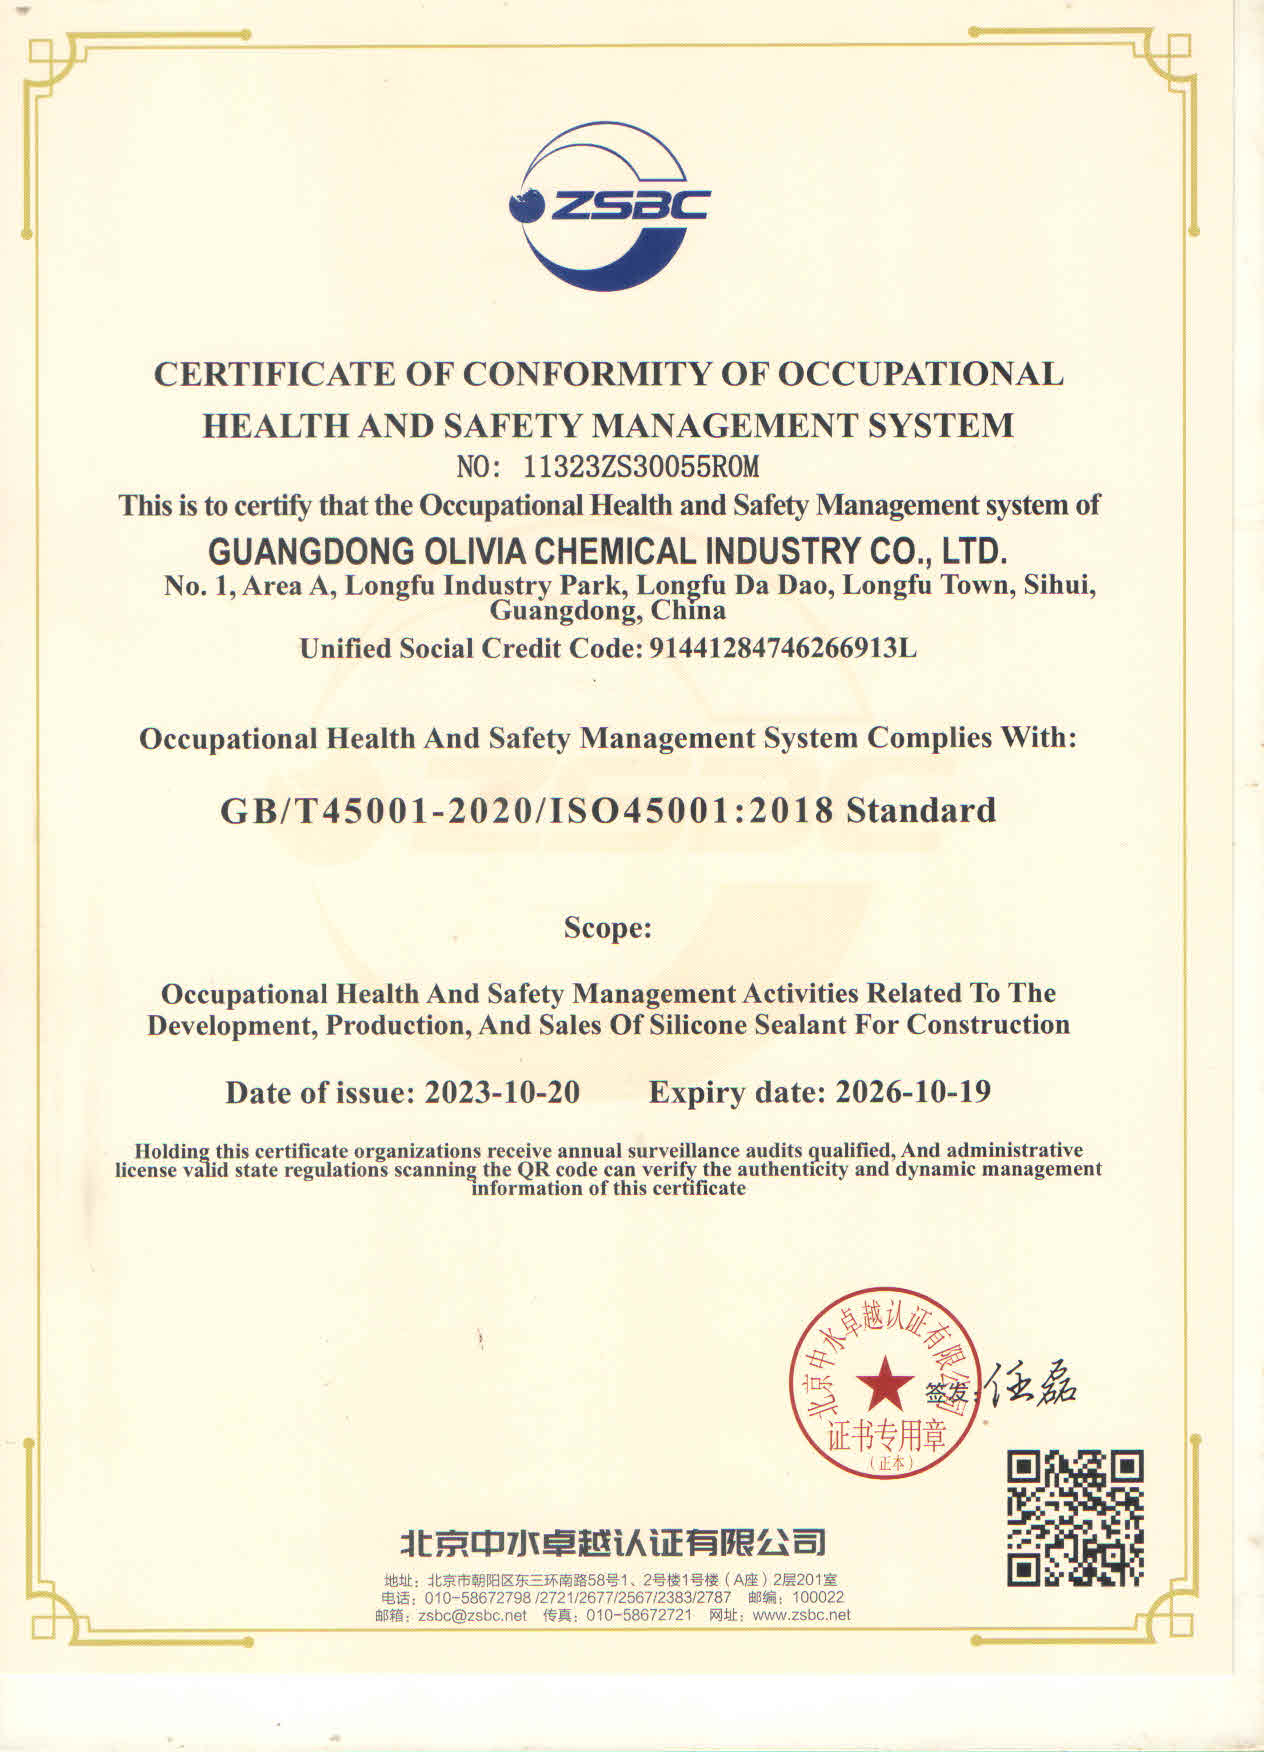 CERTIFICATE OF CONFORMITY OF OCCUPATIONAL HEALTH AND SAFETY MANAGEMENT SYSTEM